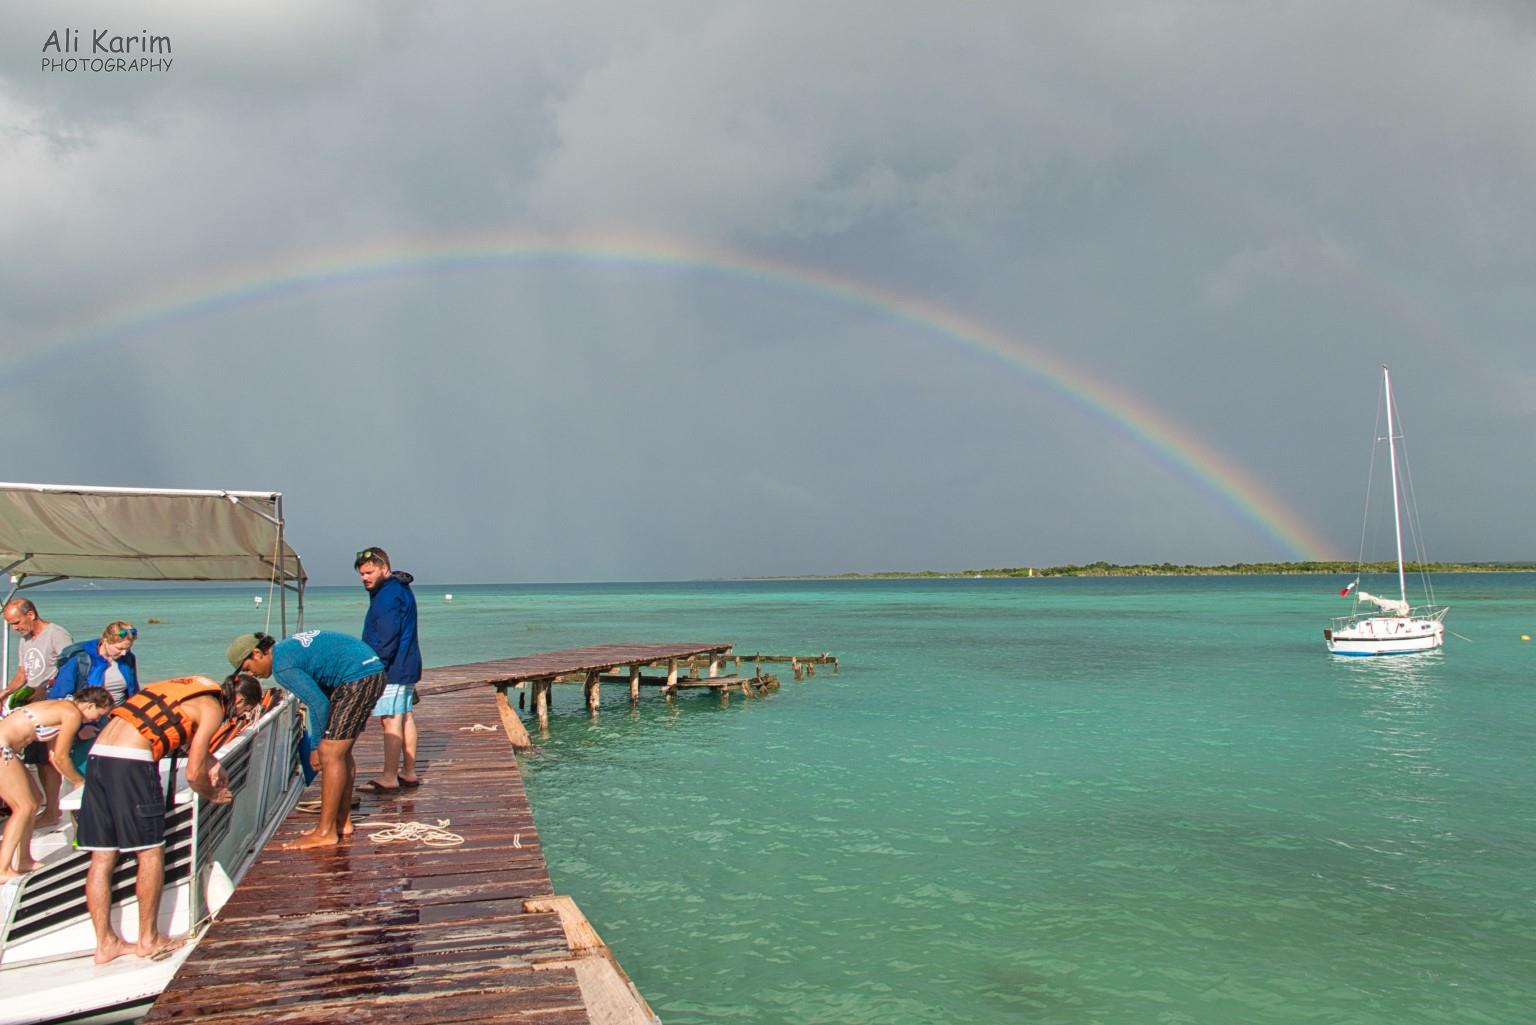 Bacalar & Mahahual, Mexico, Jan 2020, We did get rained on twice during the trip and got thoroughly drenched. The tequila and this rainbow more than made up for the drenching :) 